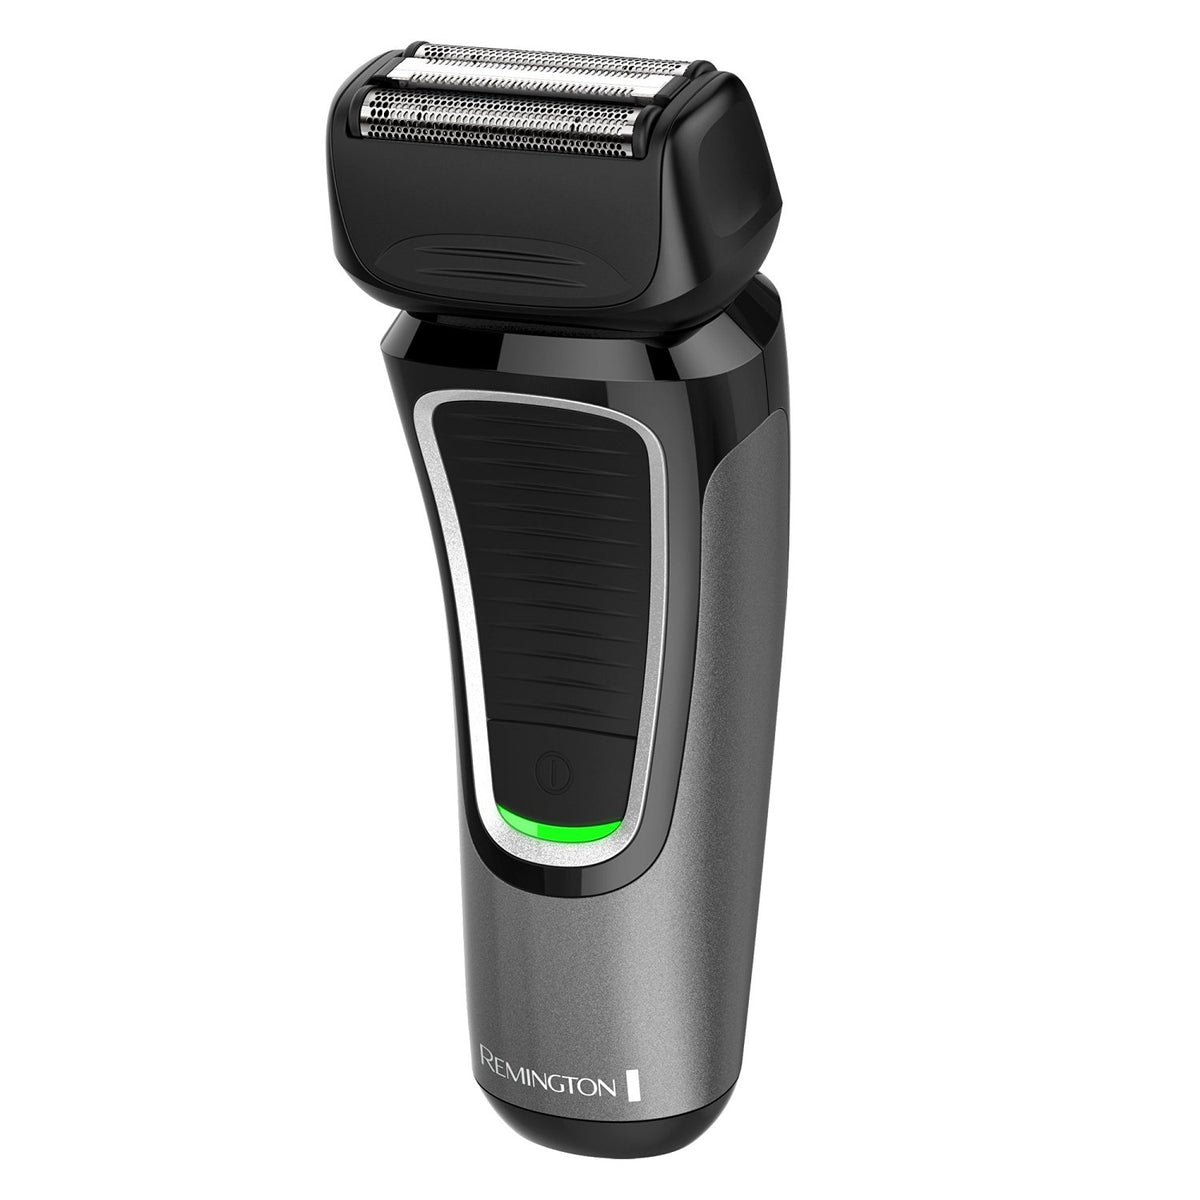 buy shavers at cheap rate in bulk. wholesale & retail personal care tools & essentials store.